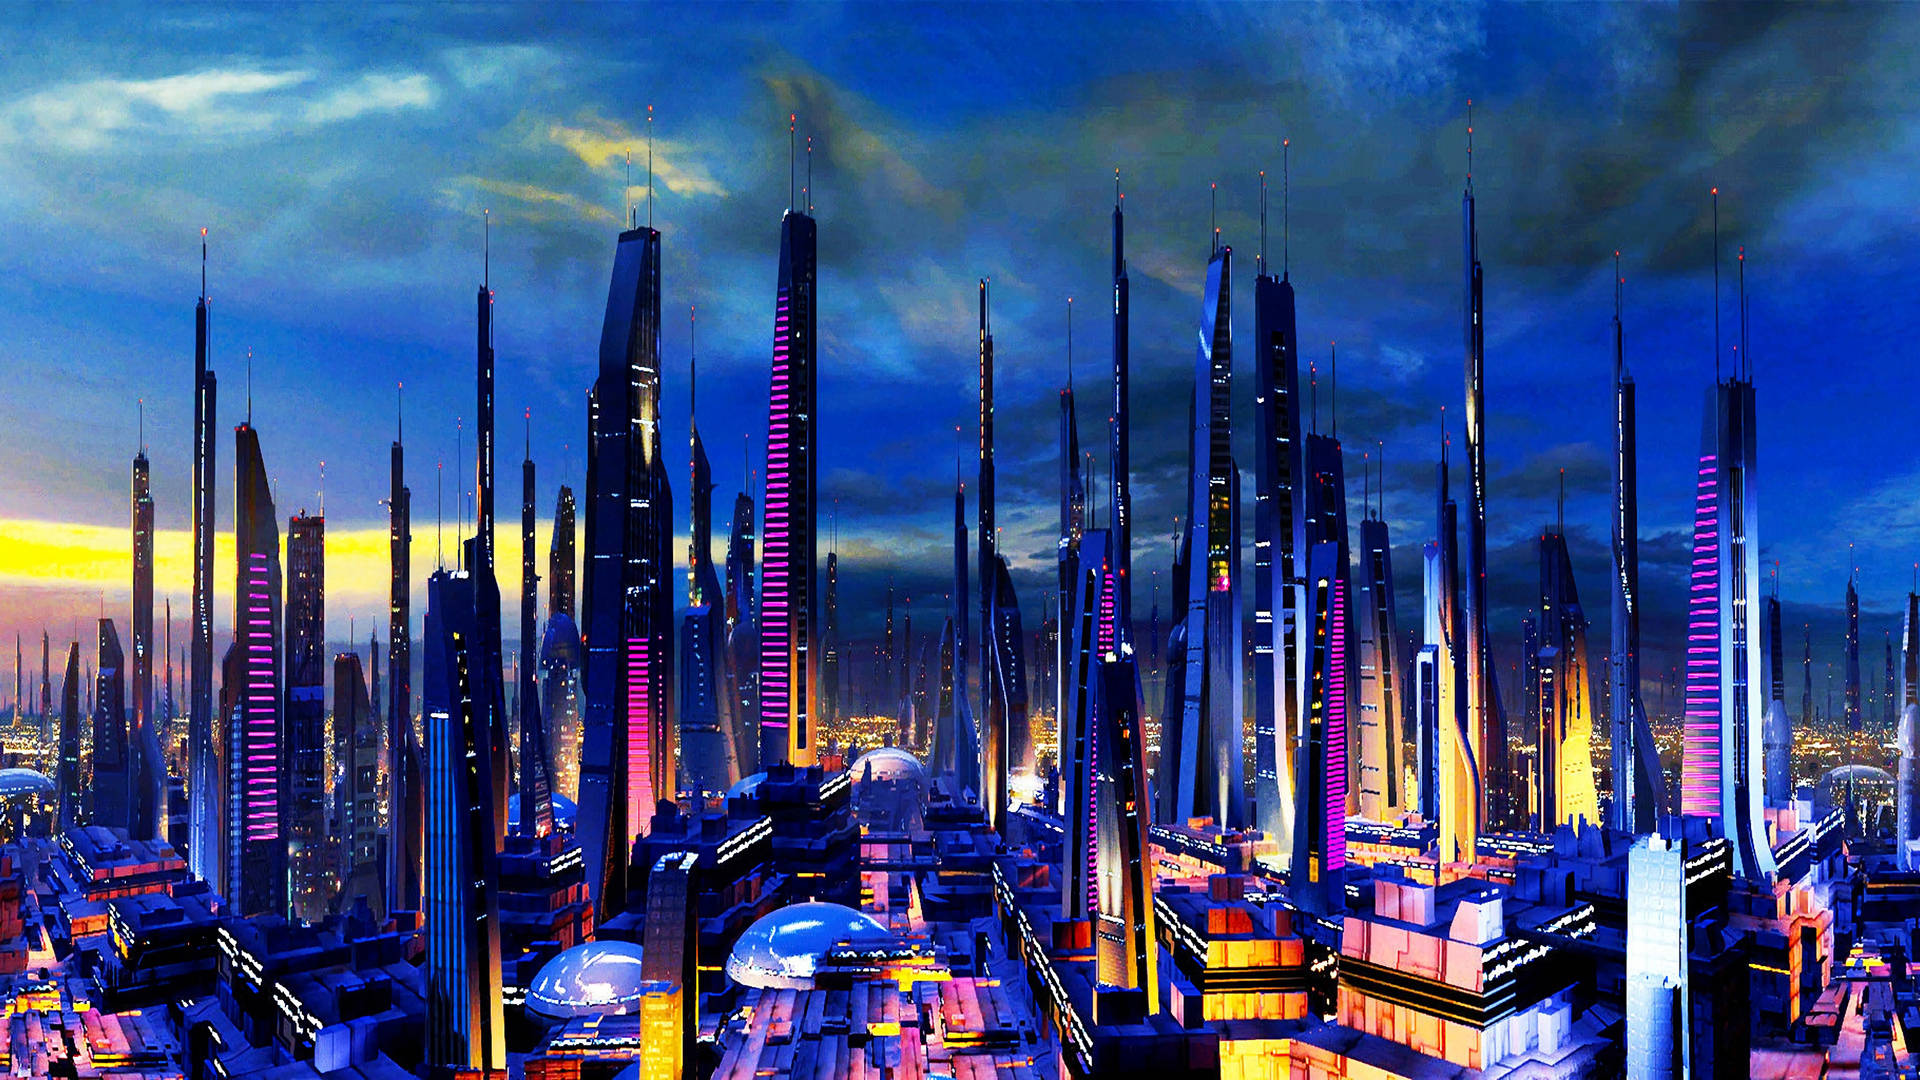 Futuristic Desktop With Spindly Buildings Wallpaper